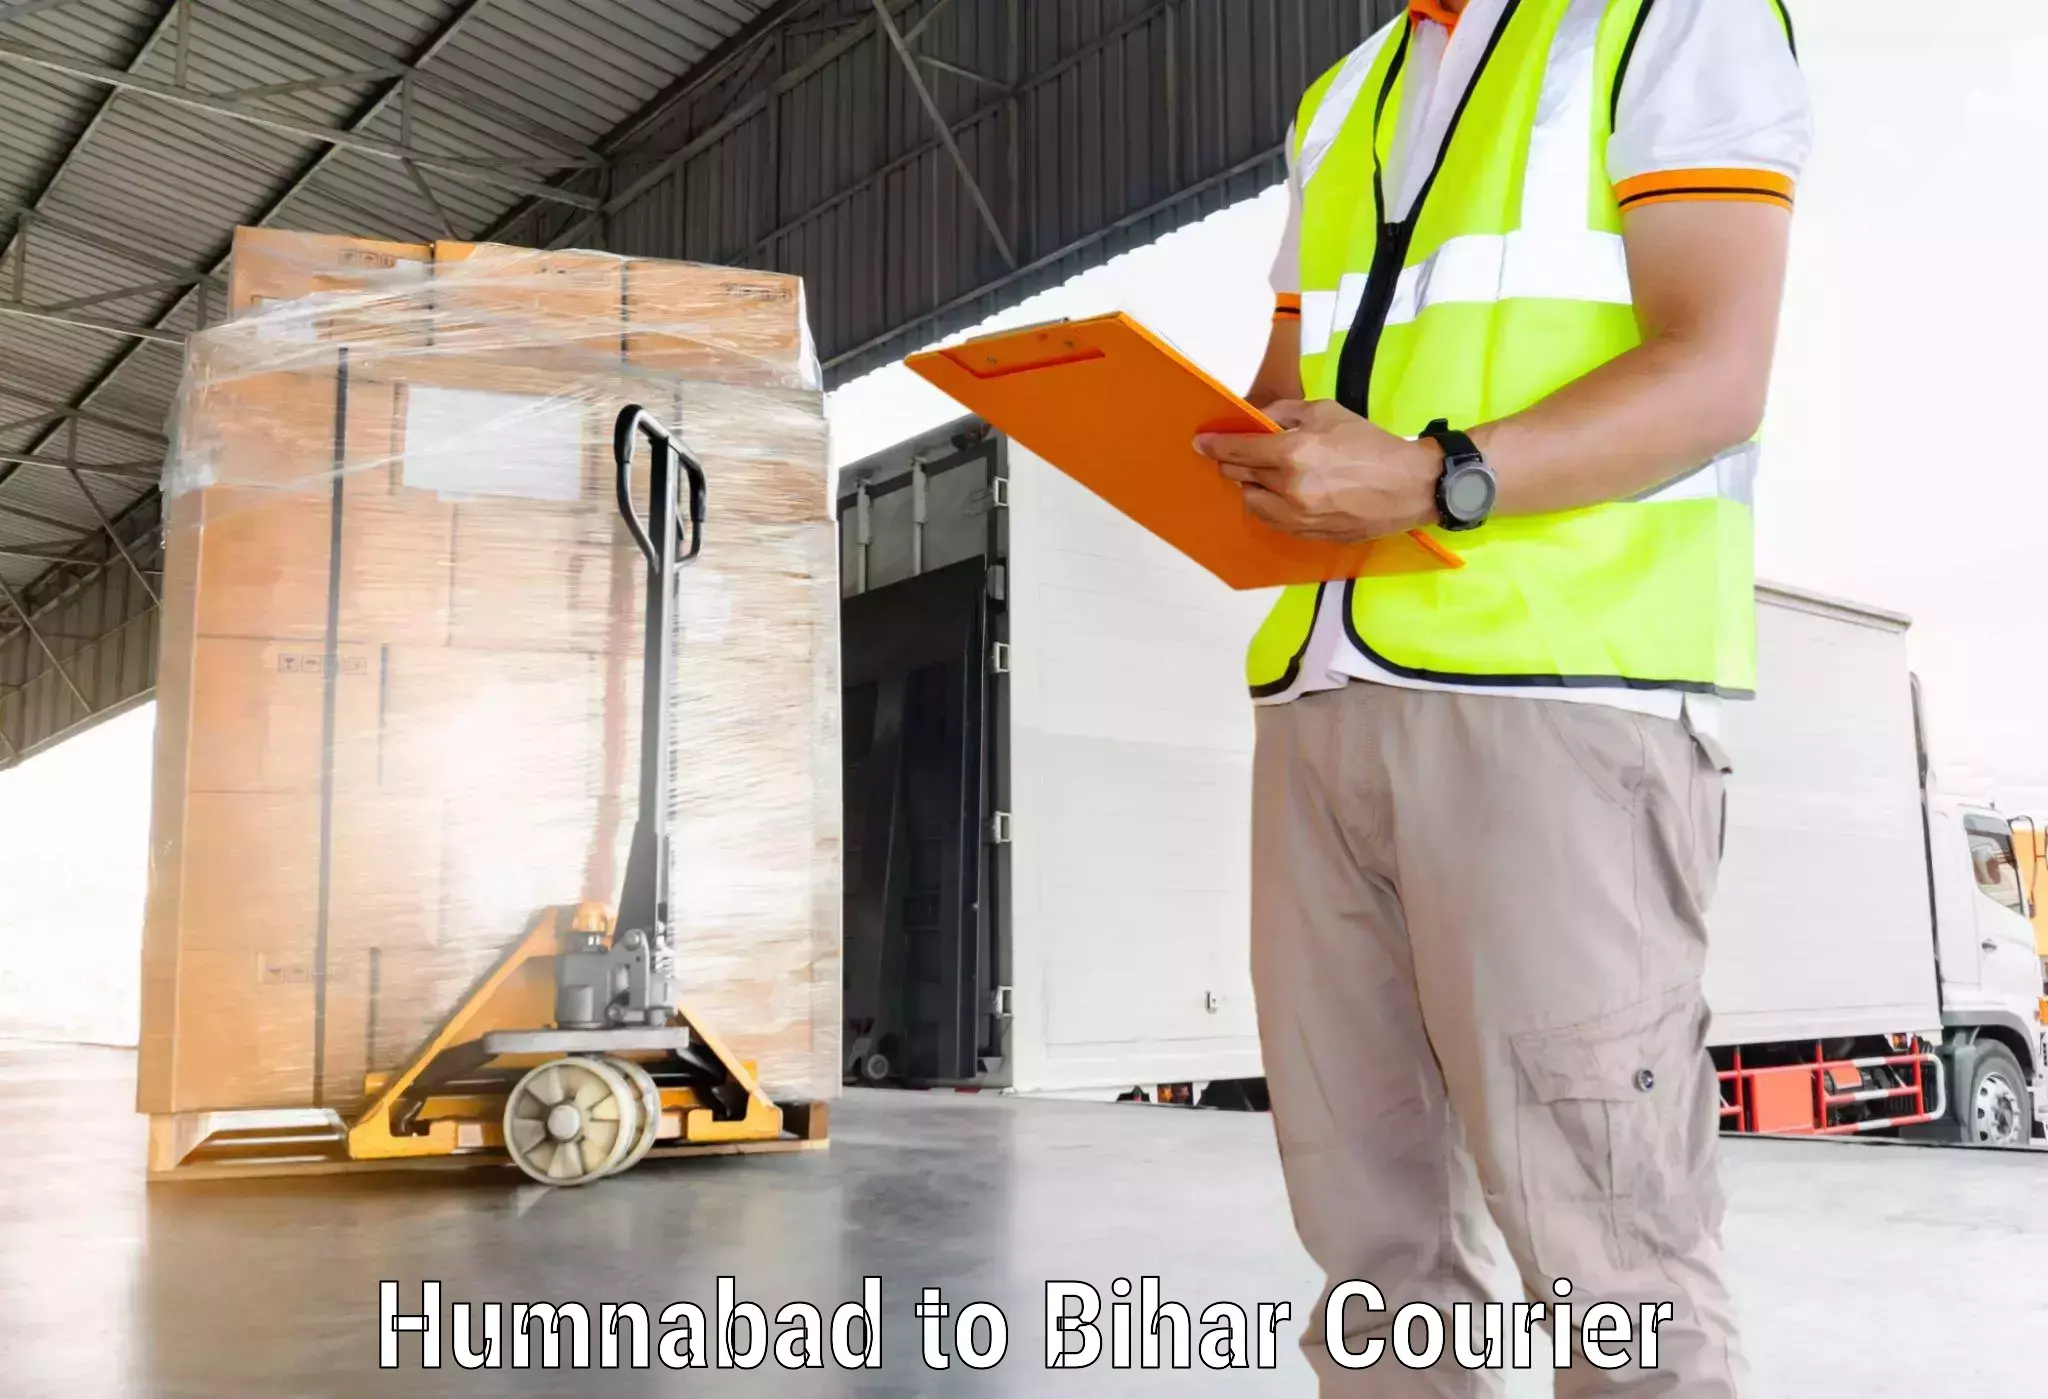 Enhanced shipping experience Humnabad to Fatwah